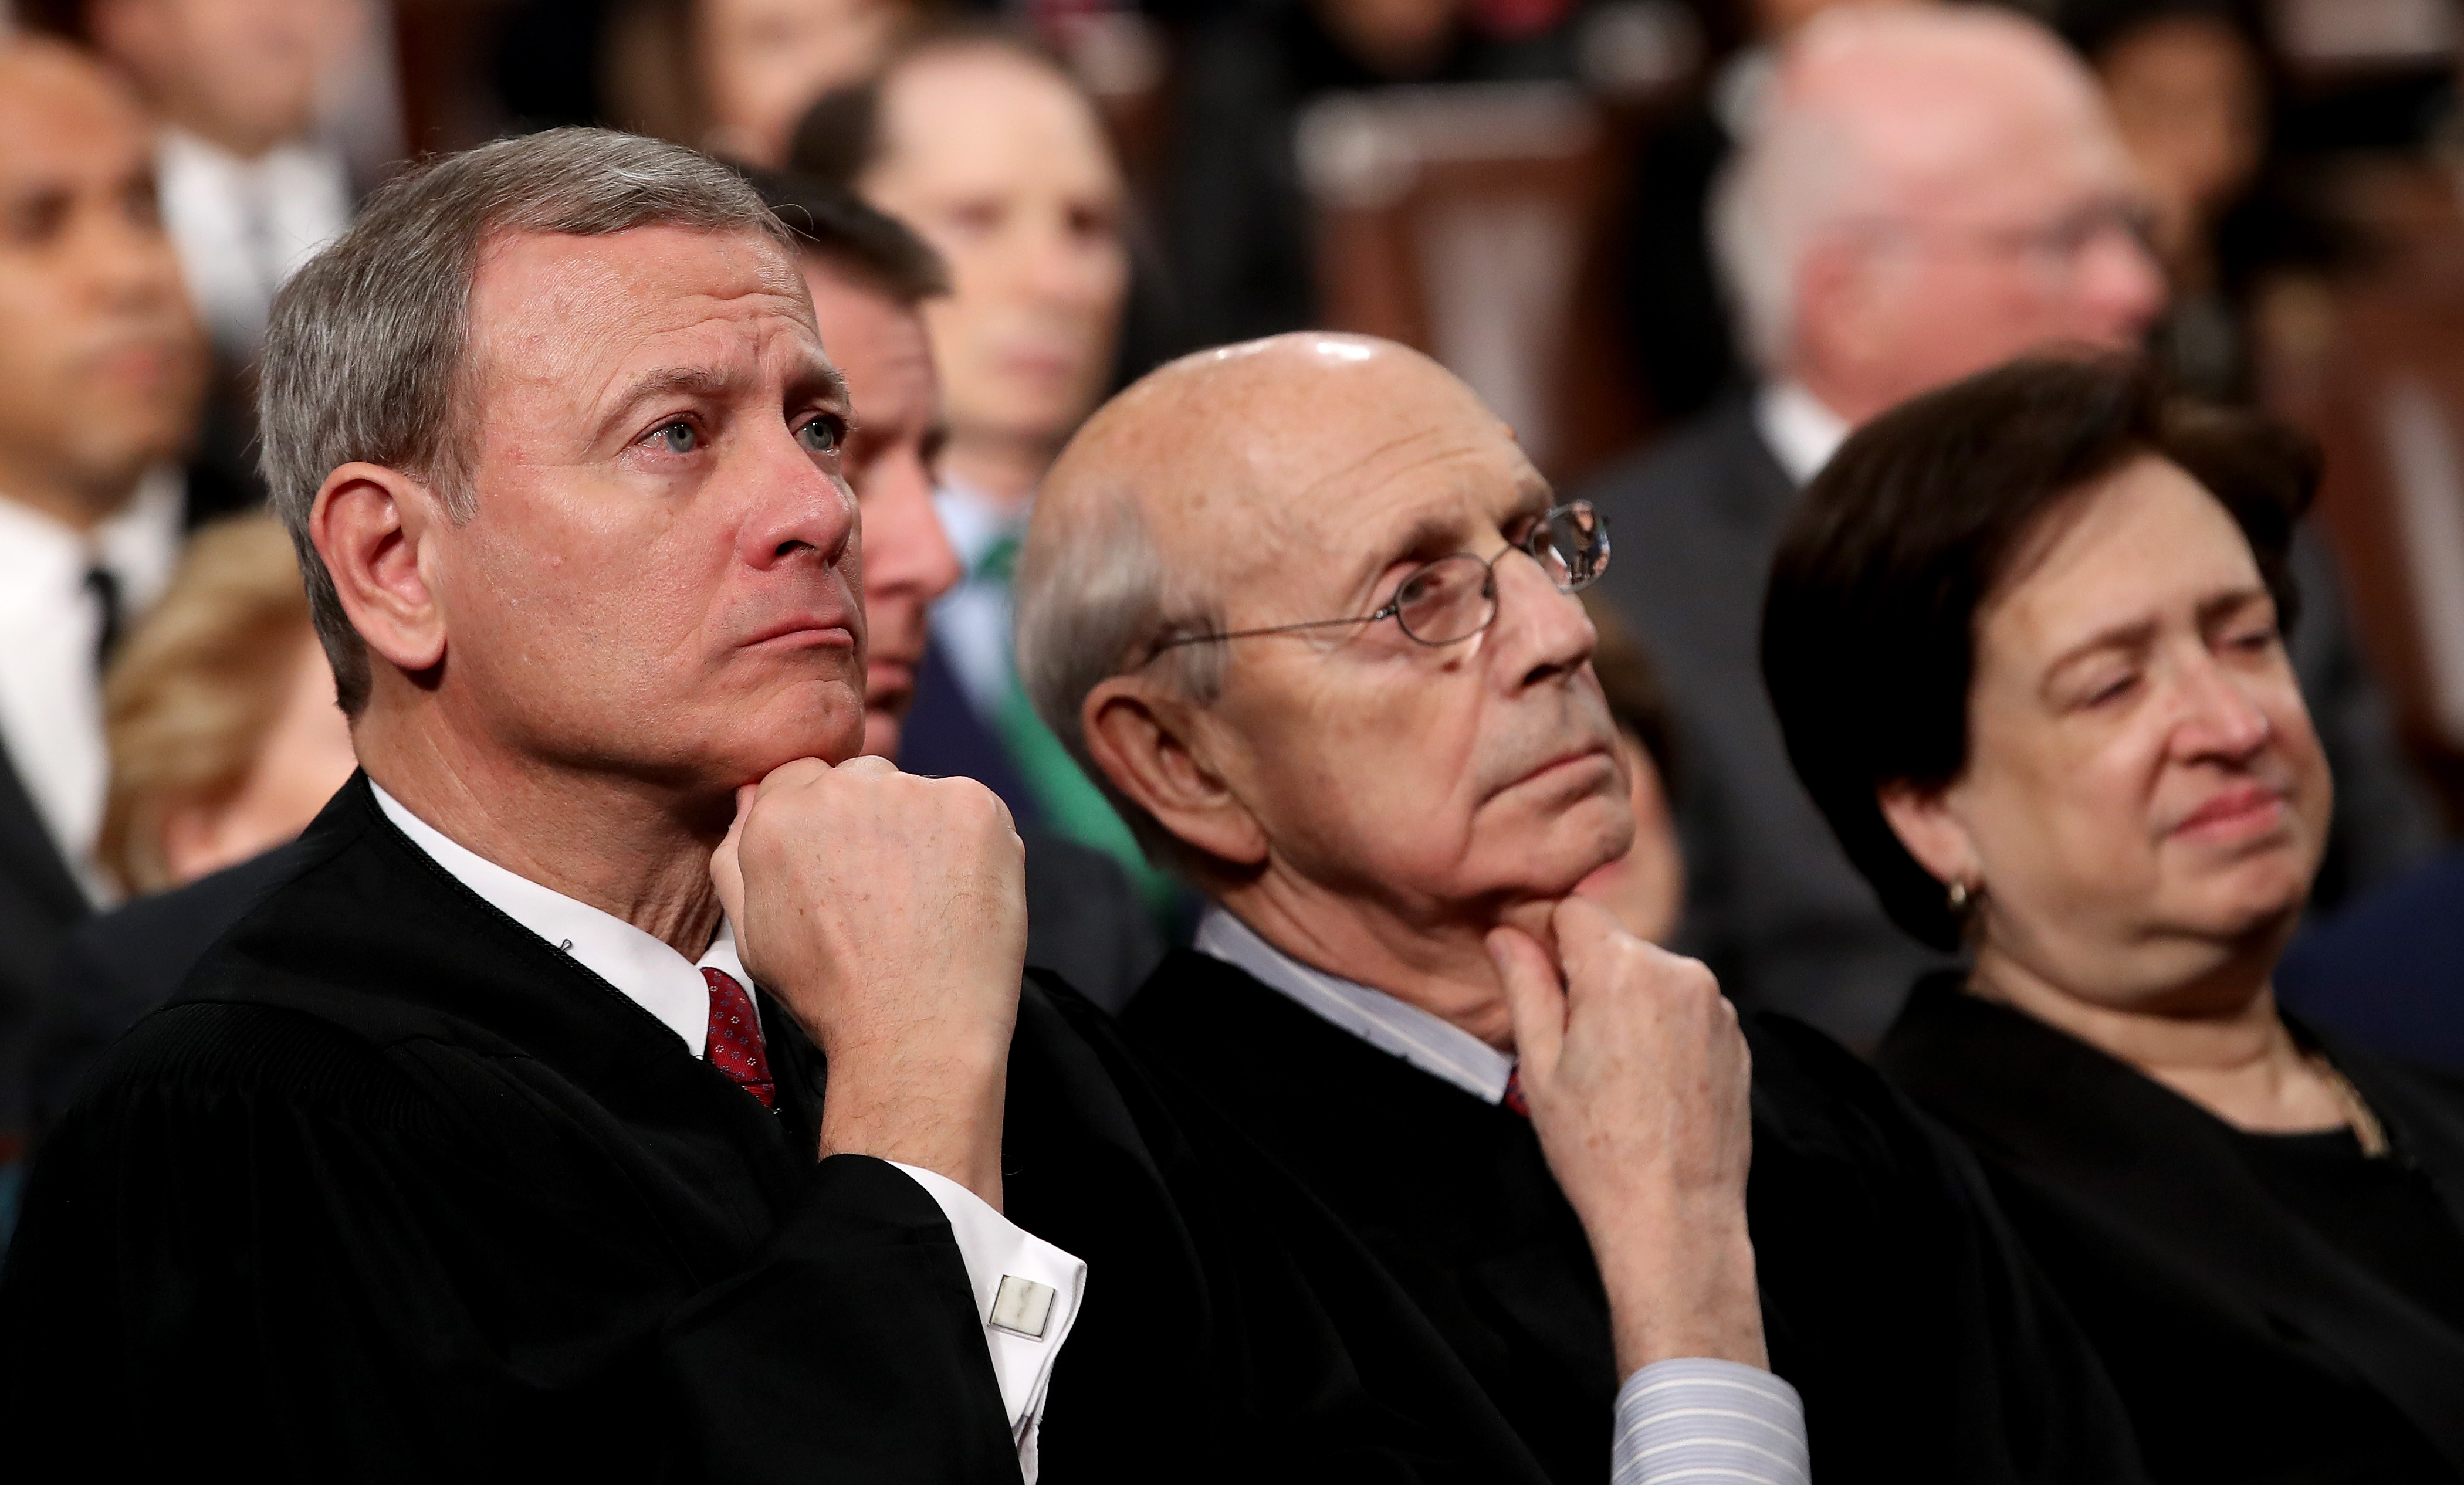 Chief Justice John Roberts, Justice Stephen Breyer, and Justice Elena Kagan at the State of the Union address on January 30, 2018. (Win McNamee/Getty Images)